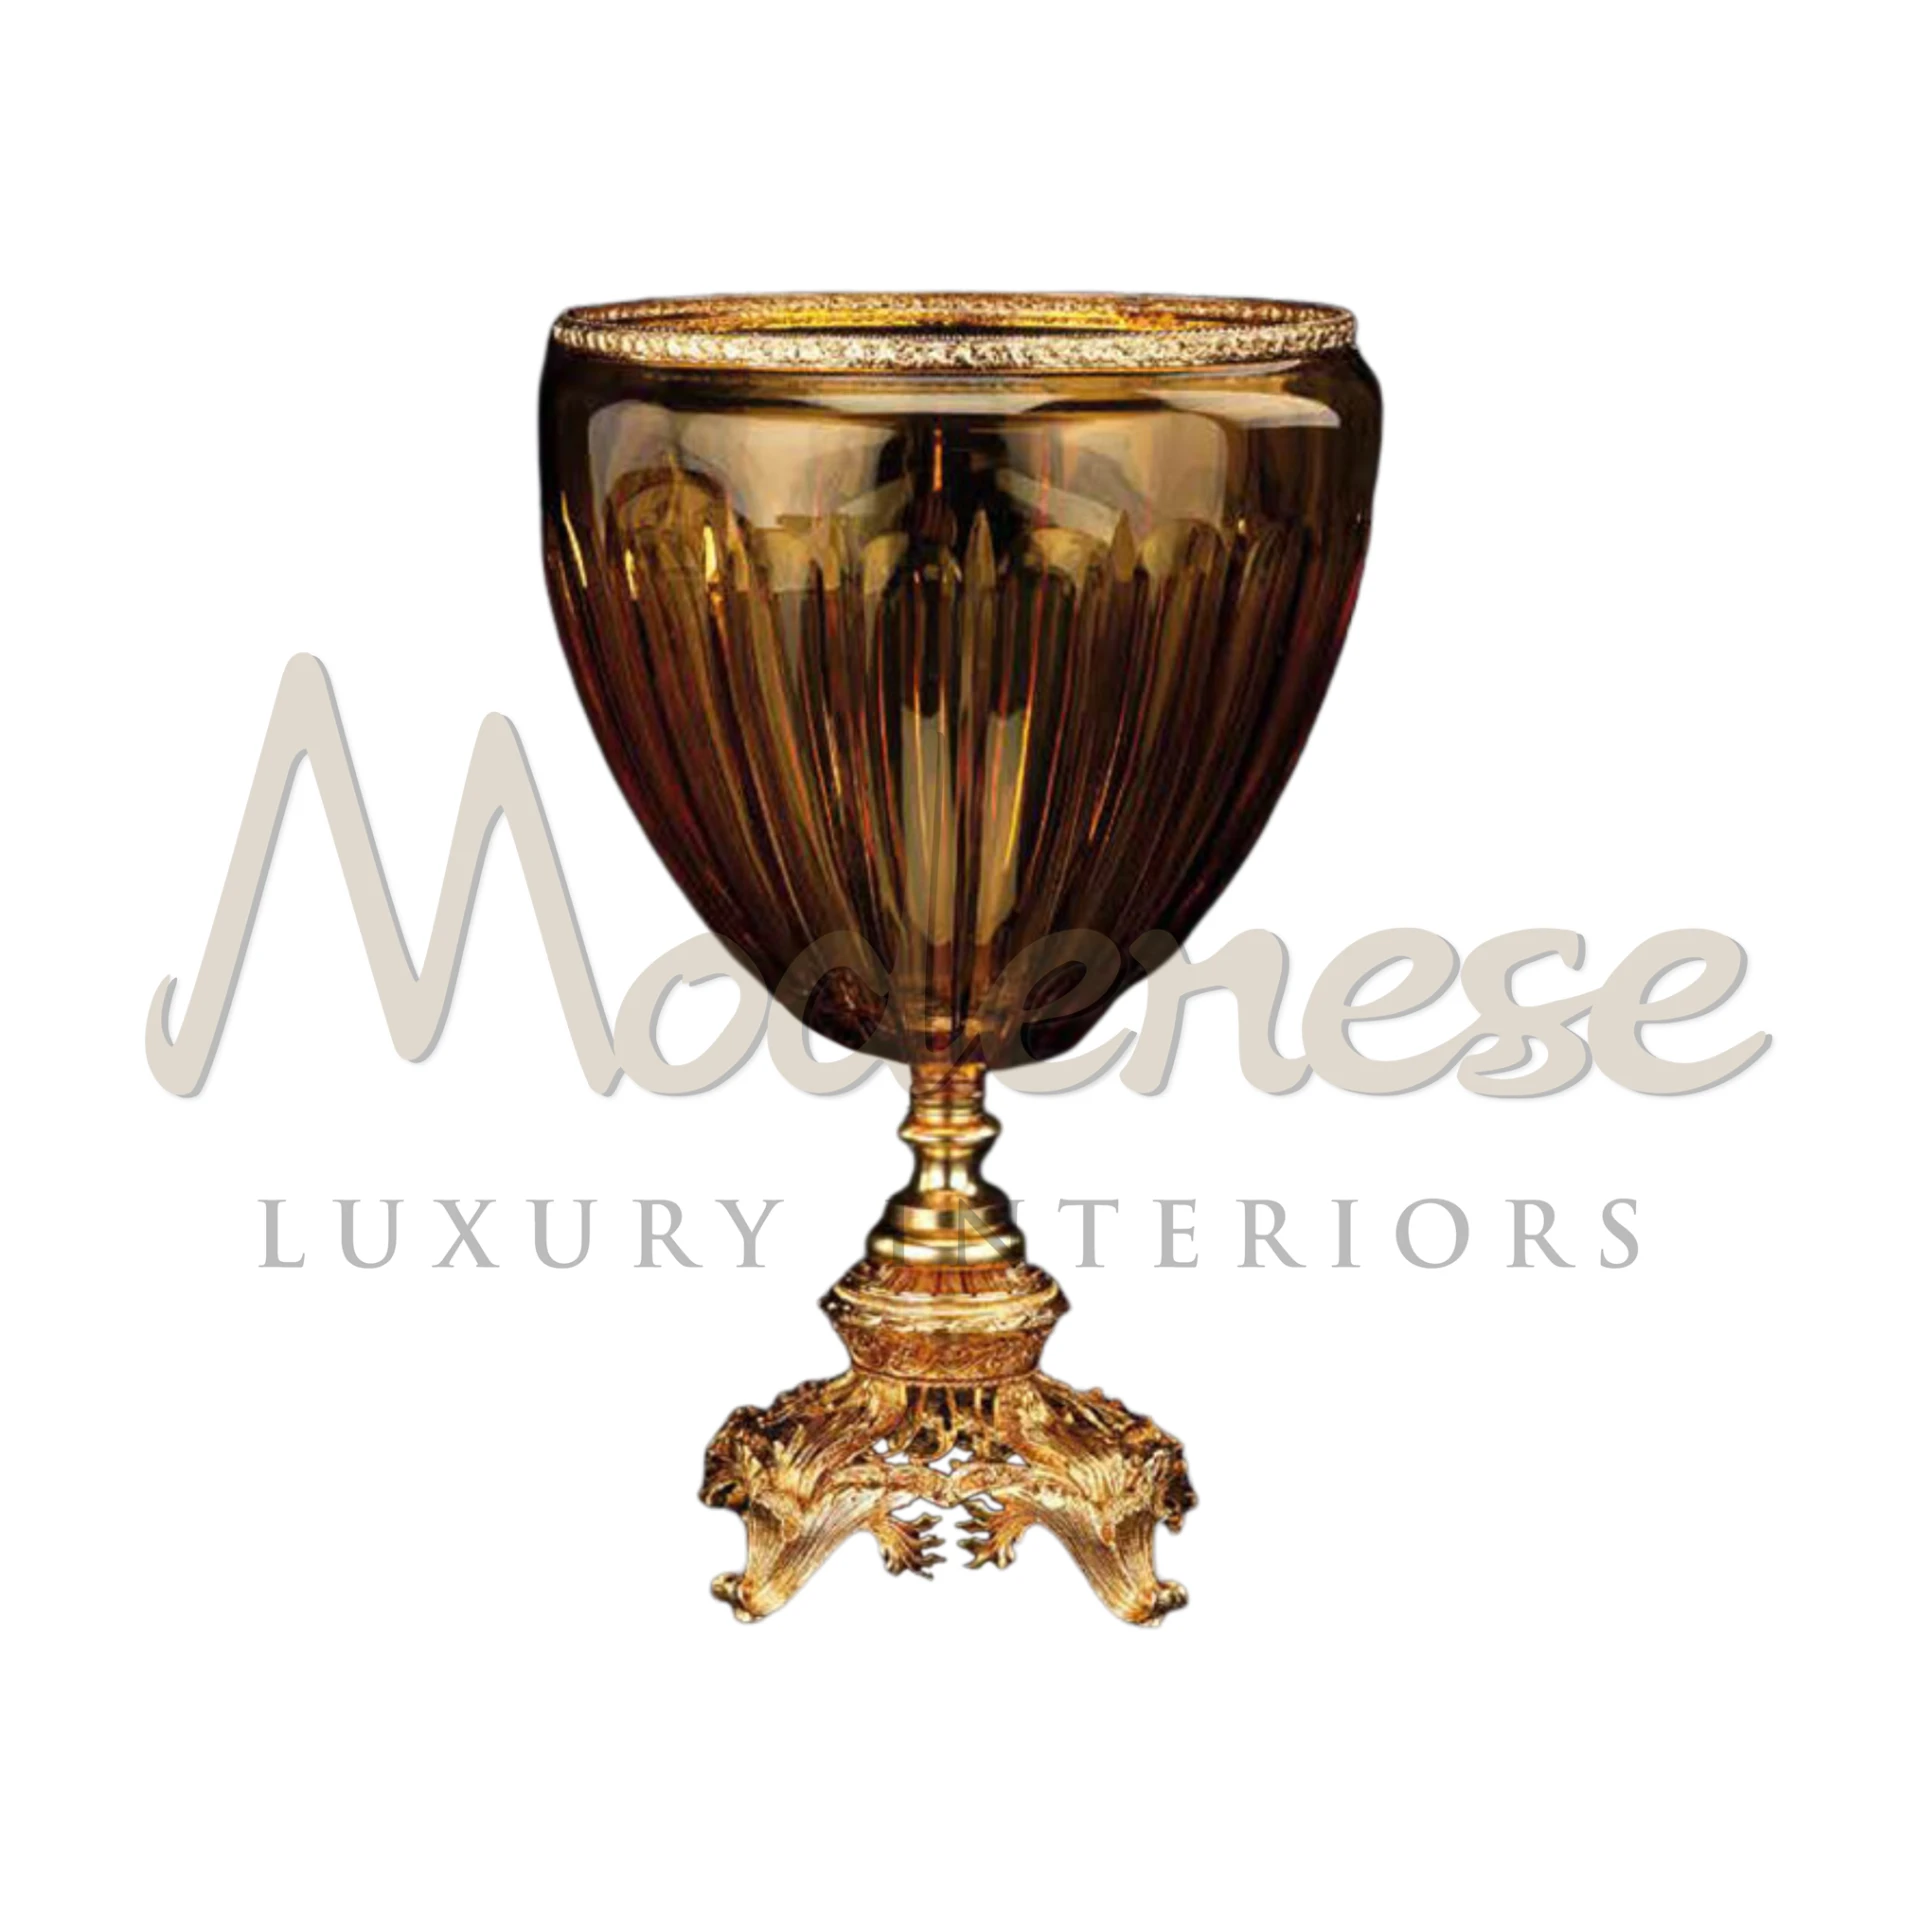 Modenese stylish crystal table vase in various shapes, ideal for luxury, classic, and baroque interior design settings.